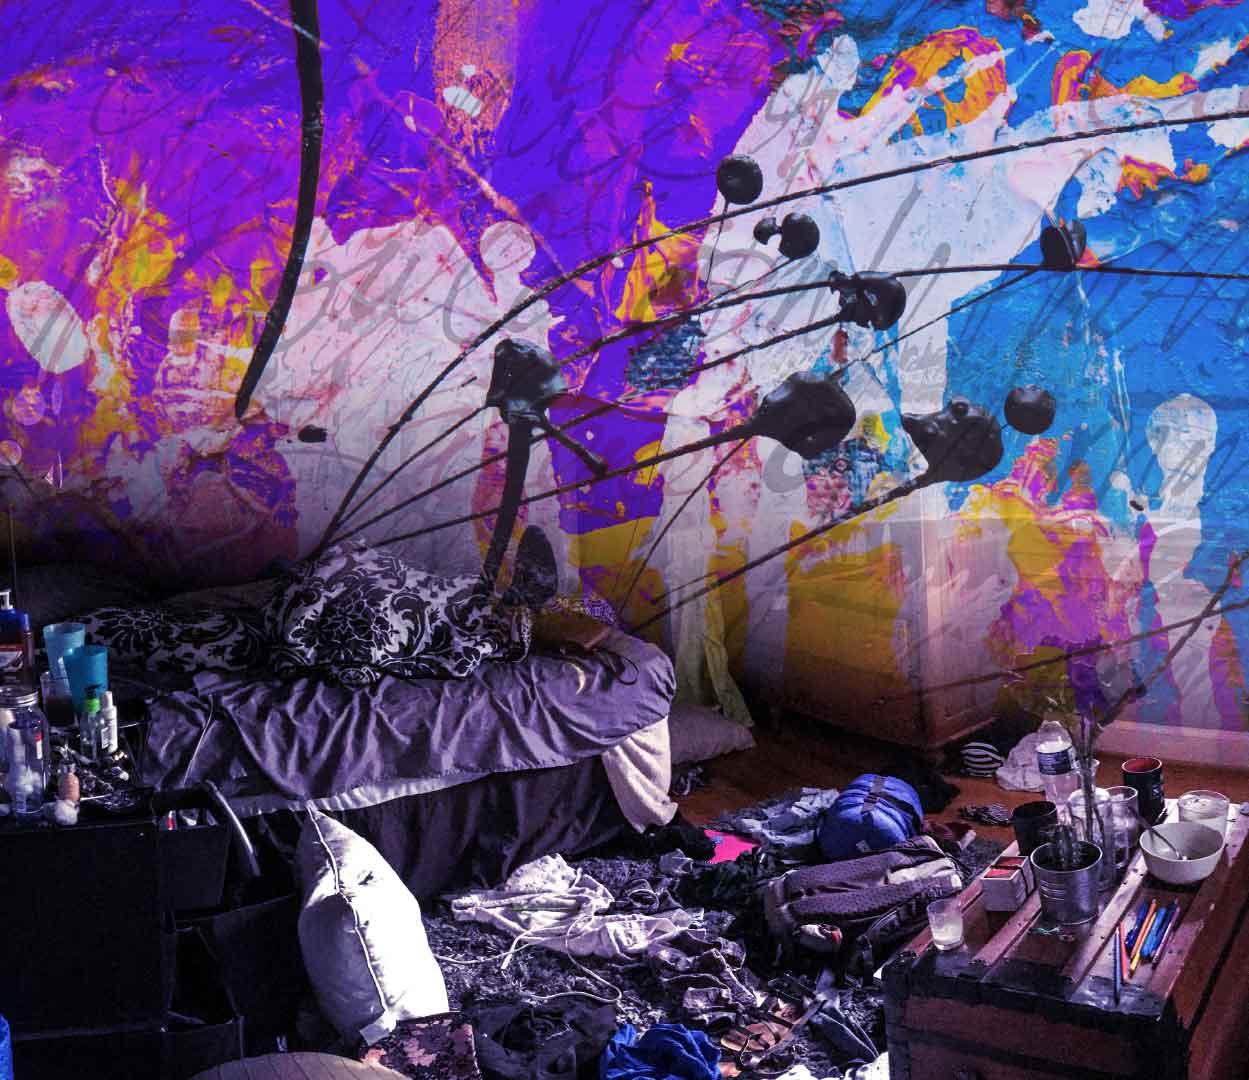 A messy abstract painting melds into a photo of a messy room